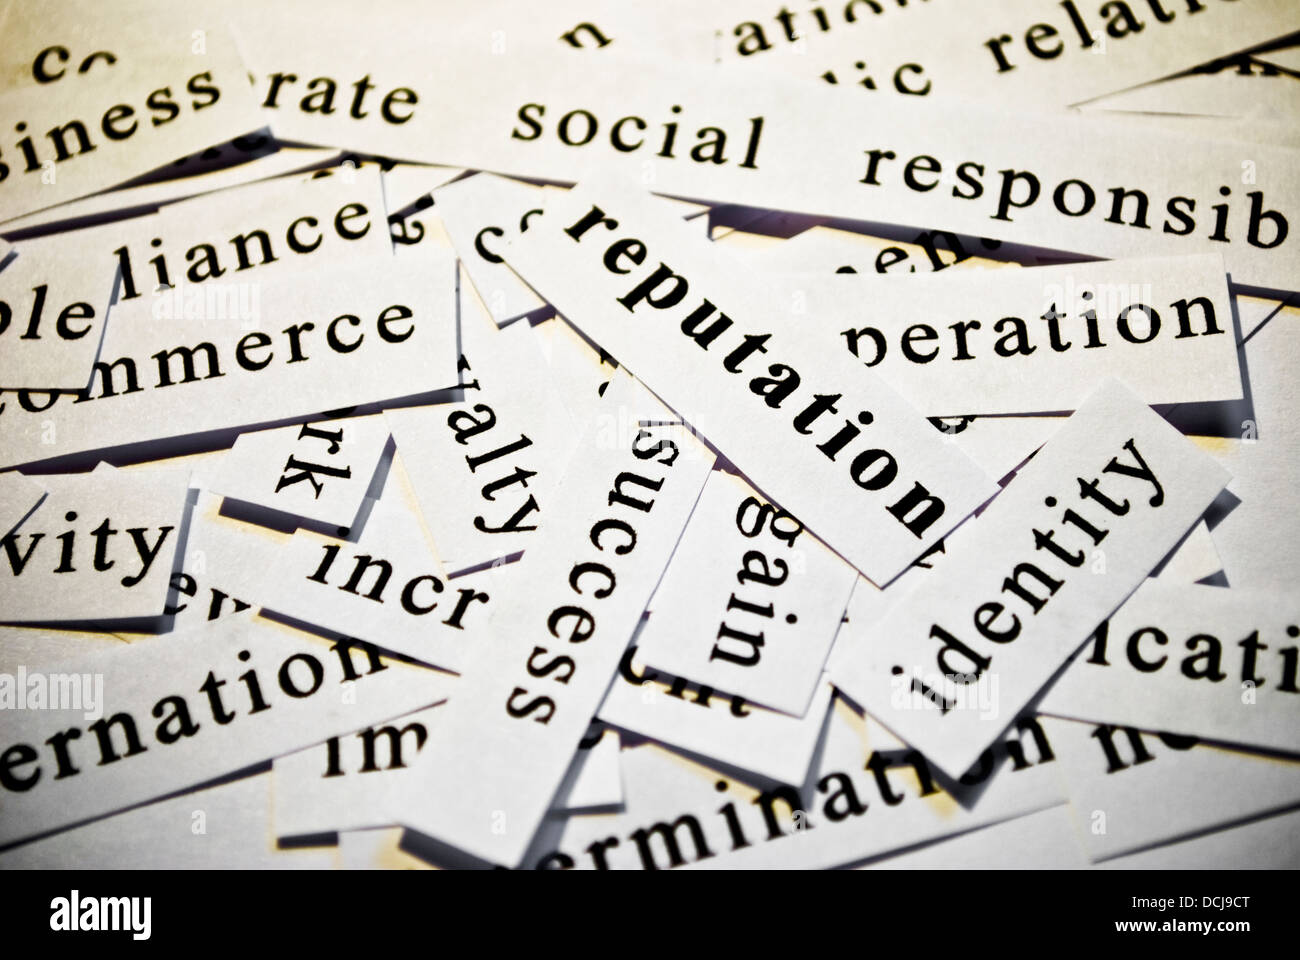 Reputation. Concept of cut-out words related with business activity Stock Photo